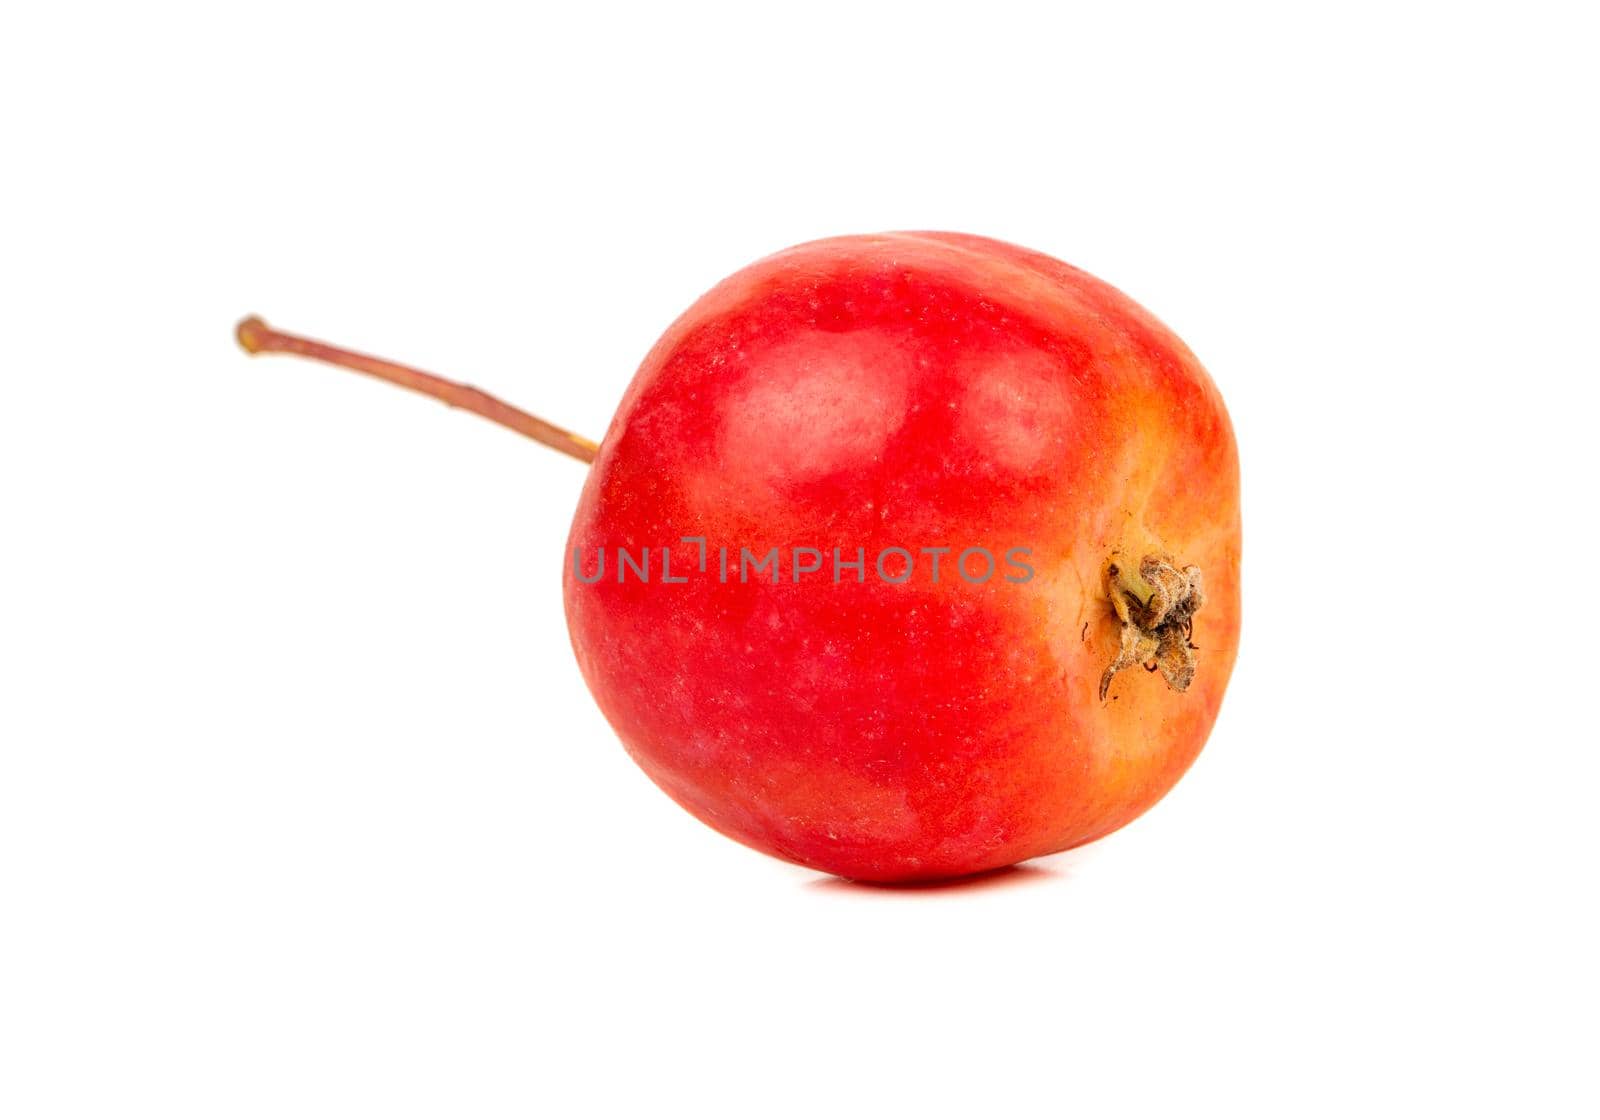 Little red paradise apple on white background